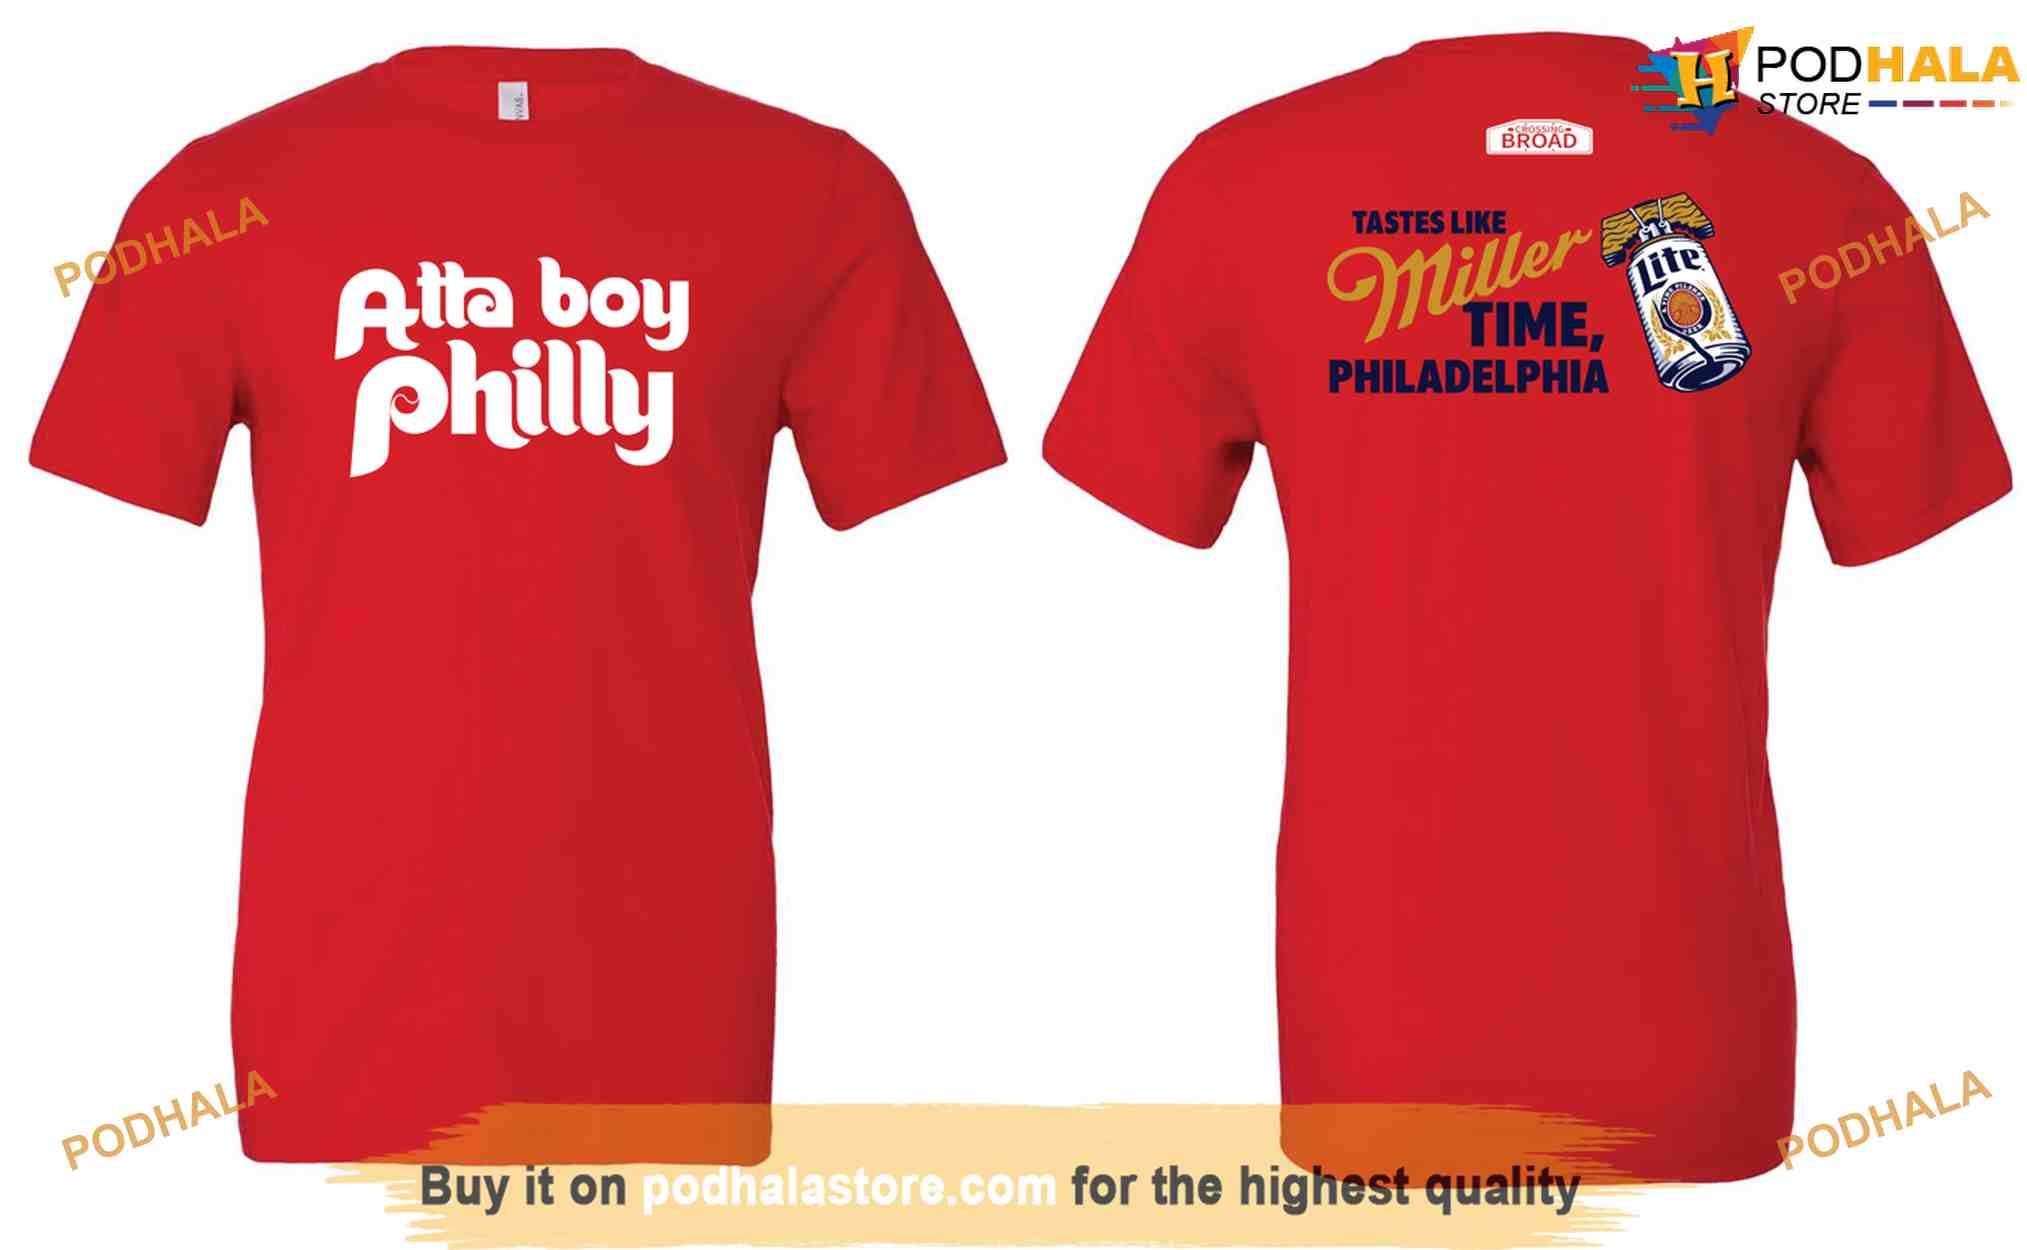 NLCS Phillies Shirt, Philadelphia Phillies 2023 Shirt For Fans - Bring Your  Ideas, Thoughts And Imaginations Into Reality Today